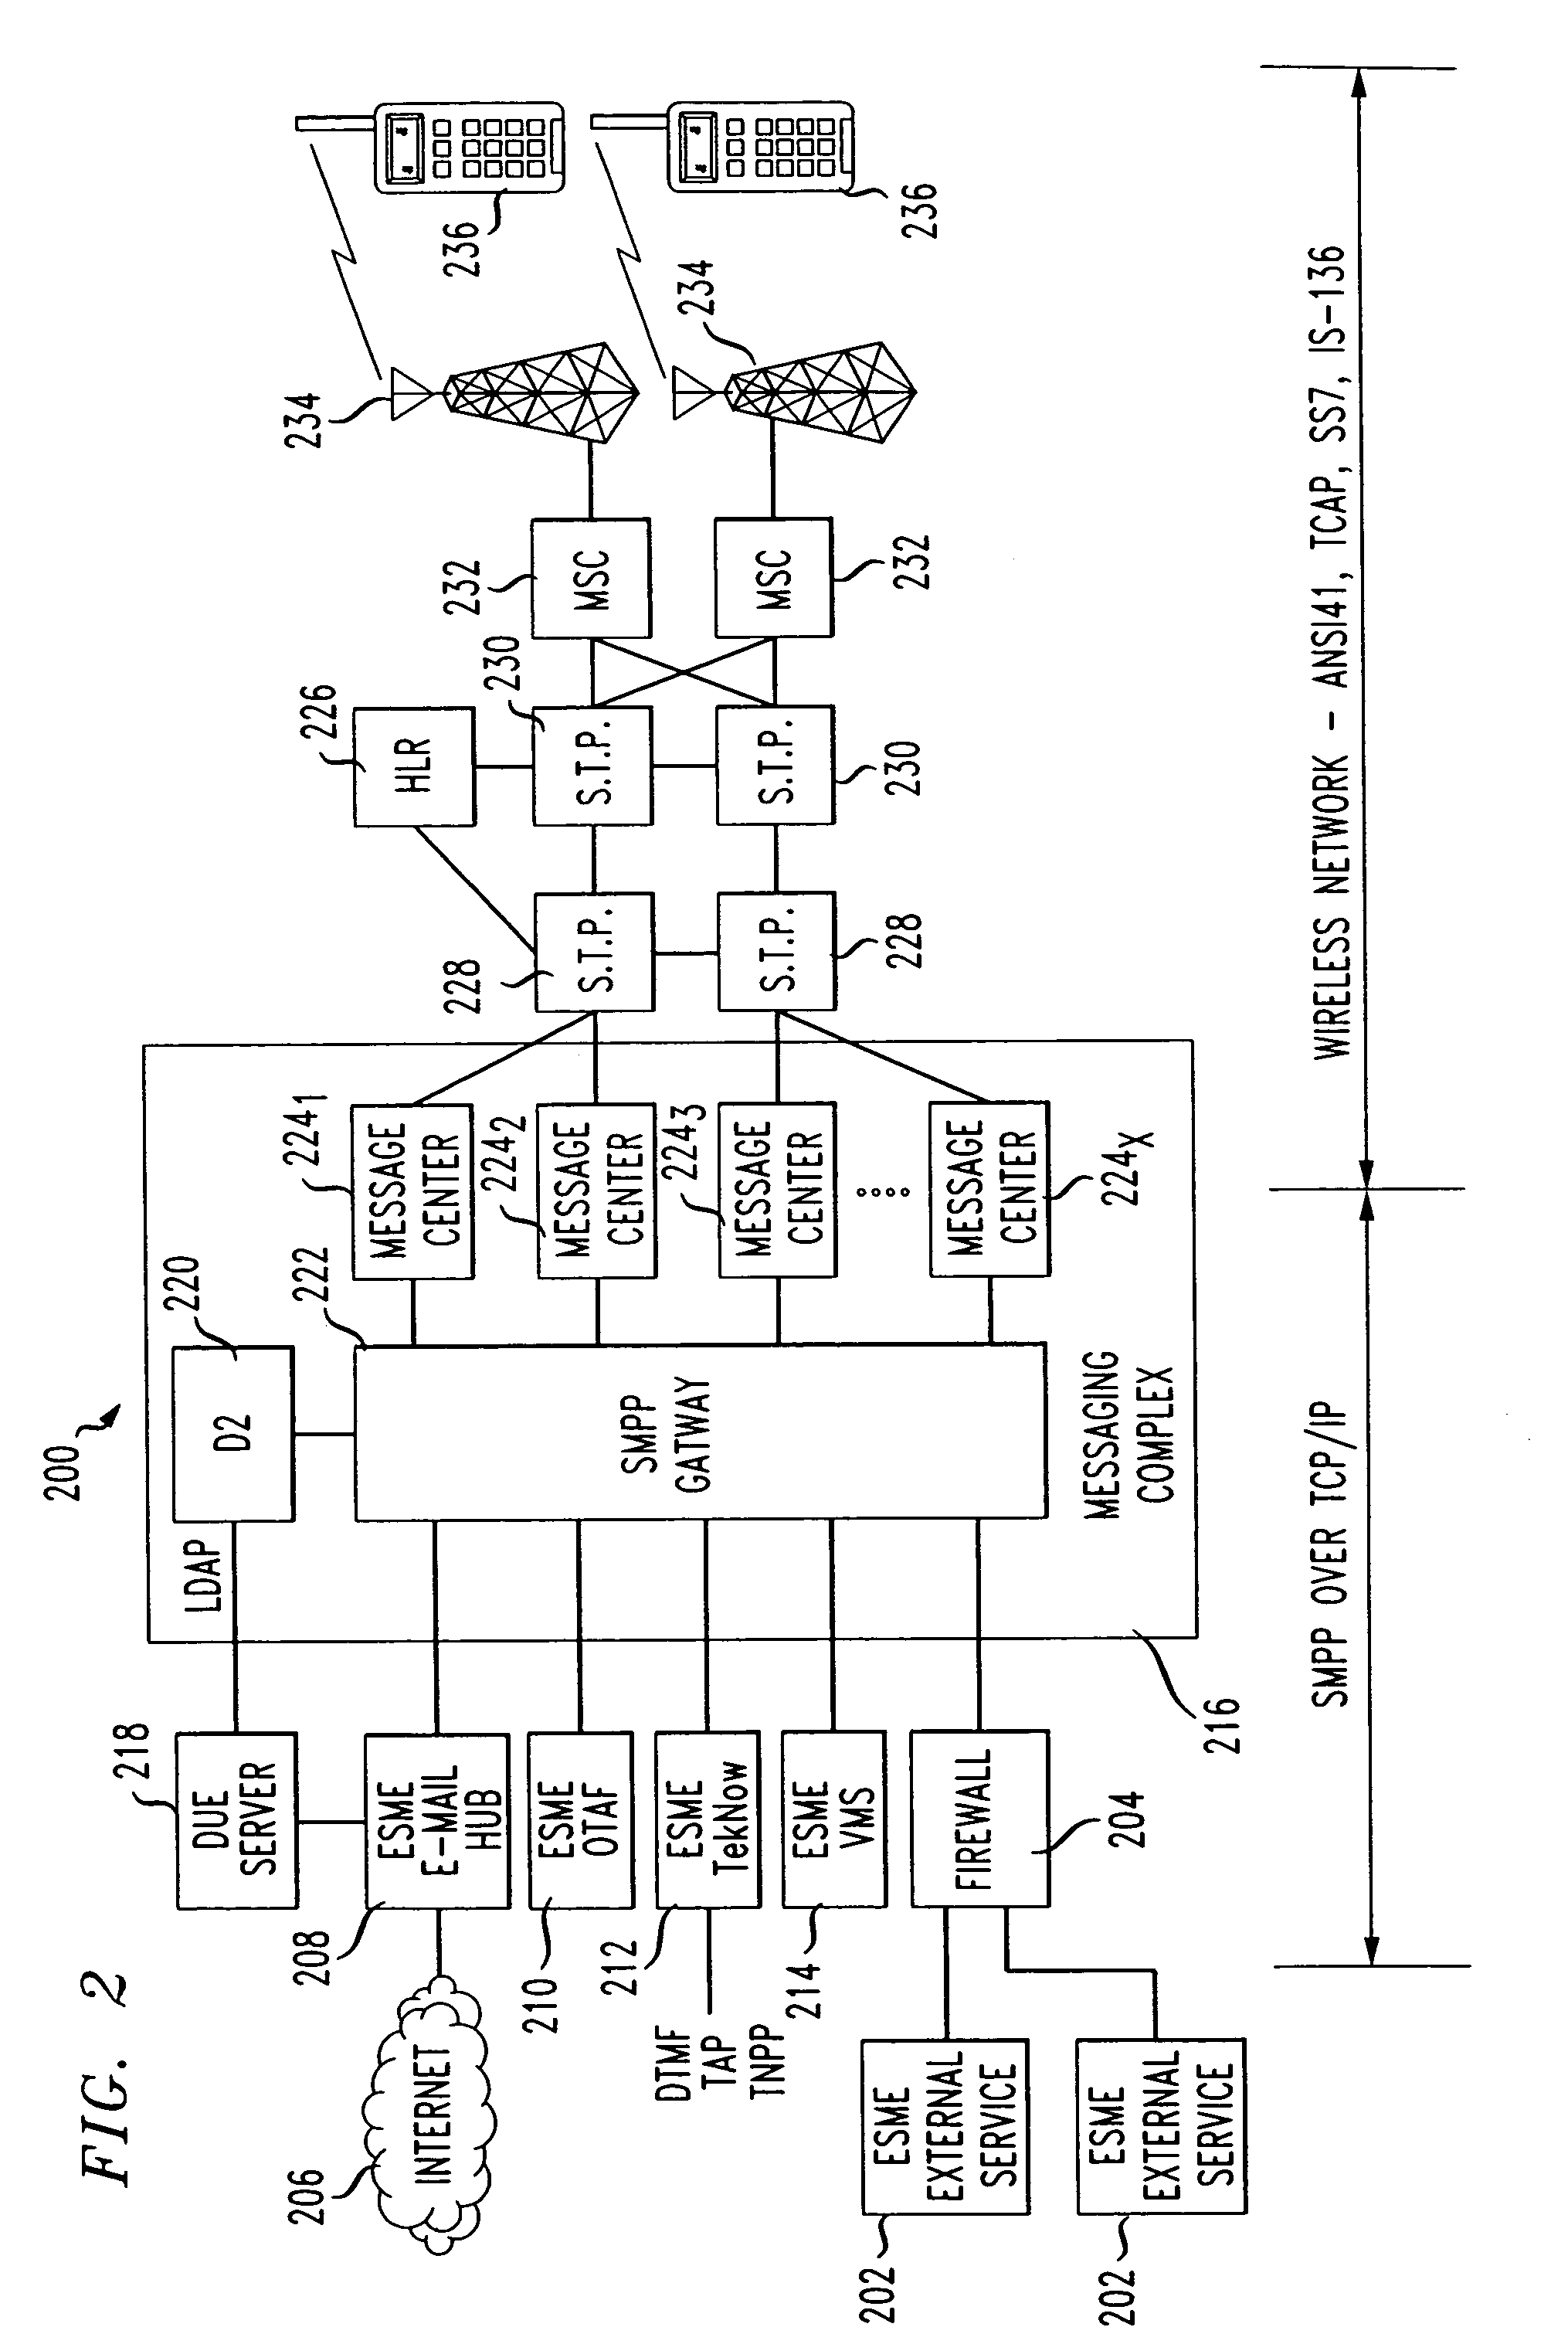 Method of delivering short messages using a SMPP gateway with standard interface